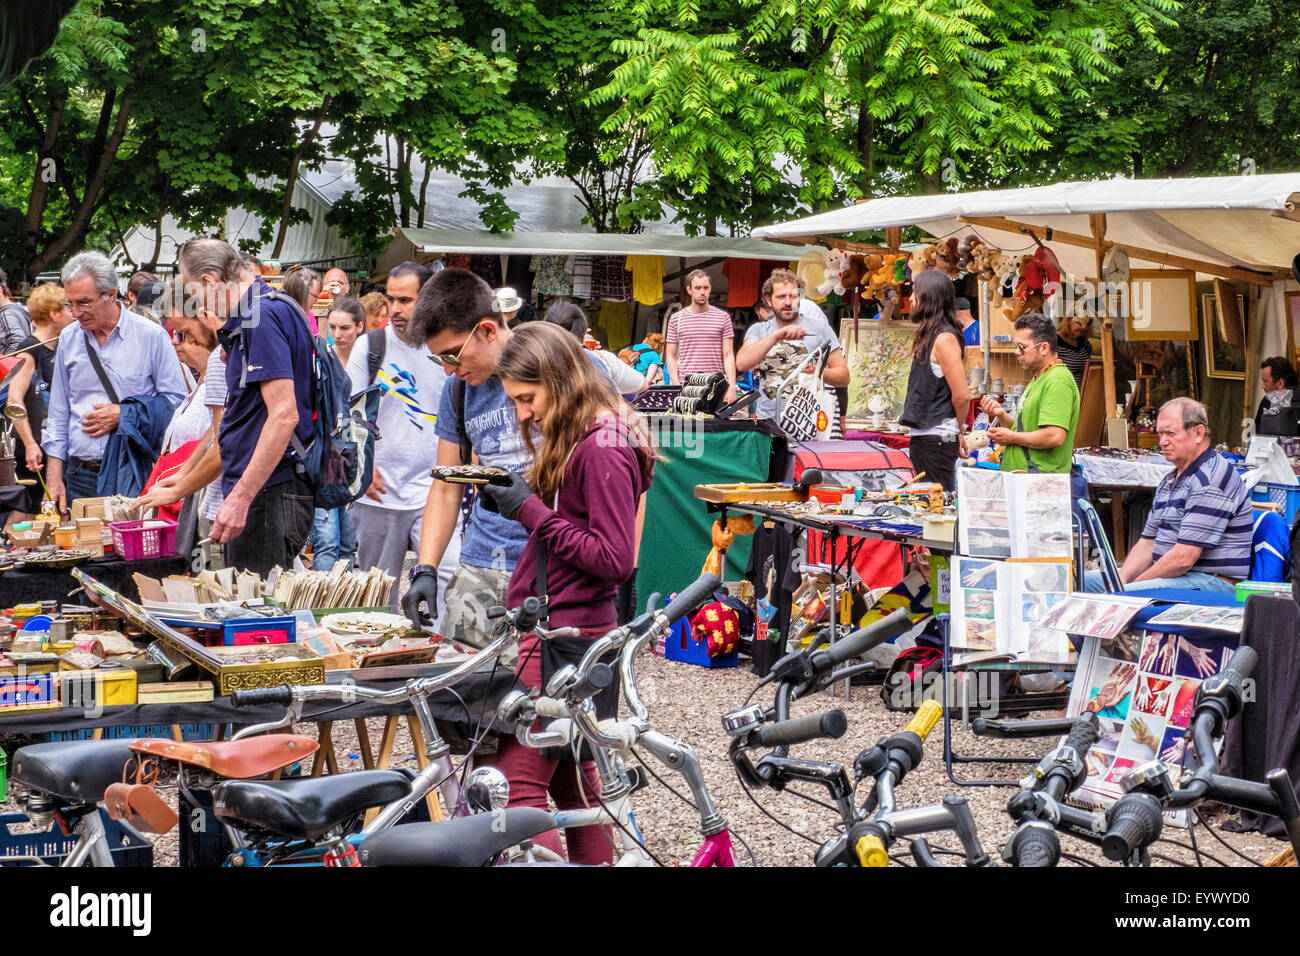 Berlin Mauer Park Flea Market - Stalls selling second hand goods and Stock Photo: 86007516 - Alamy